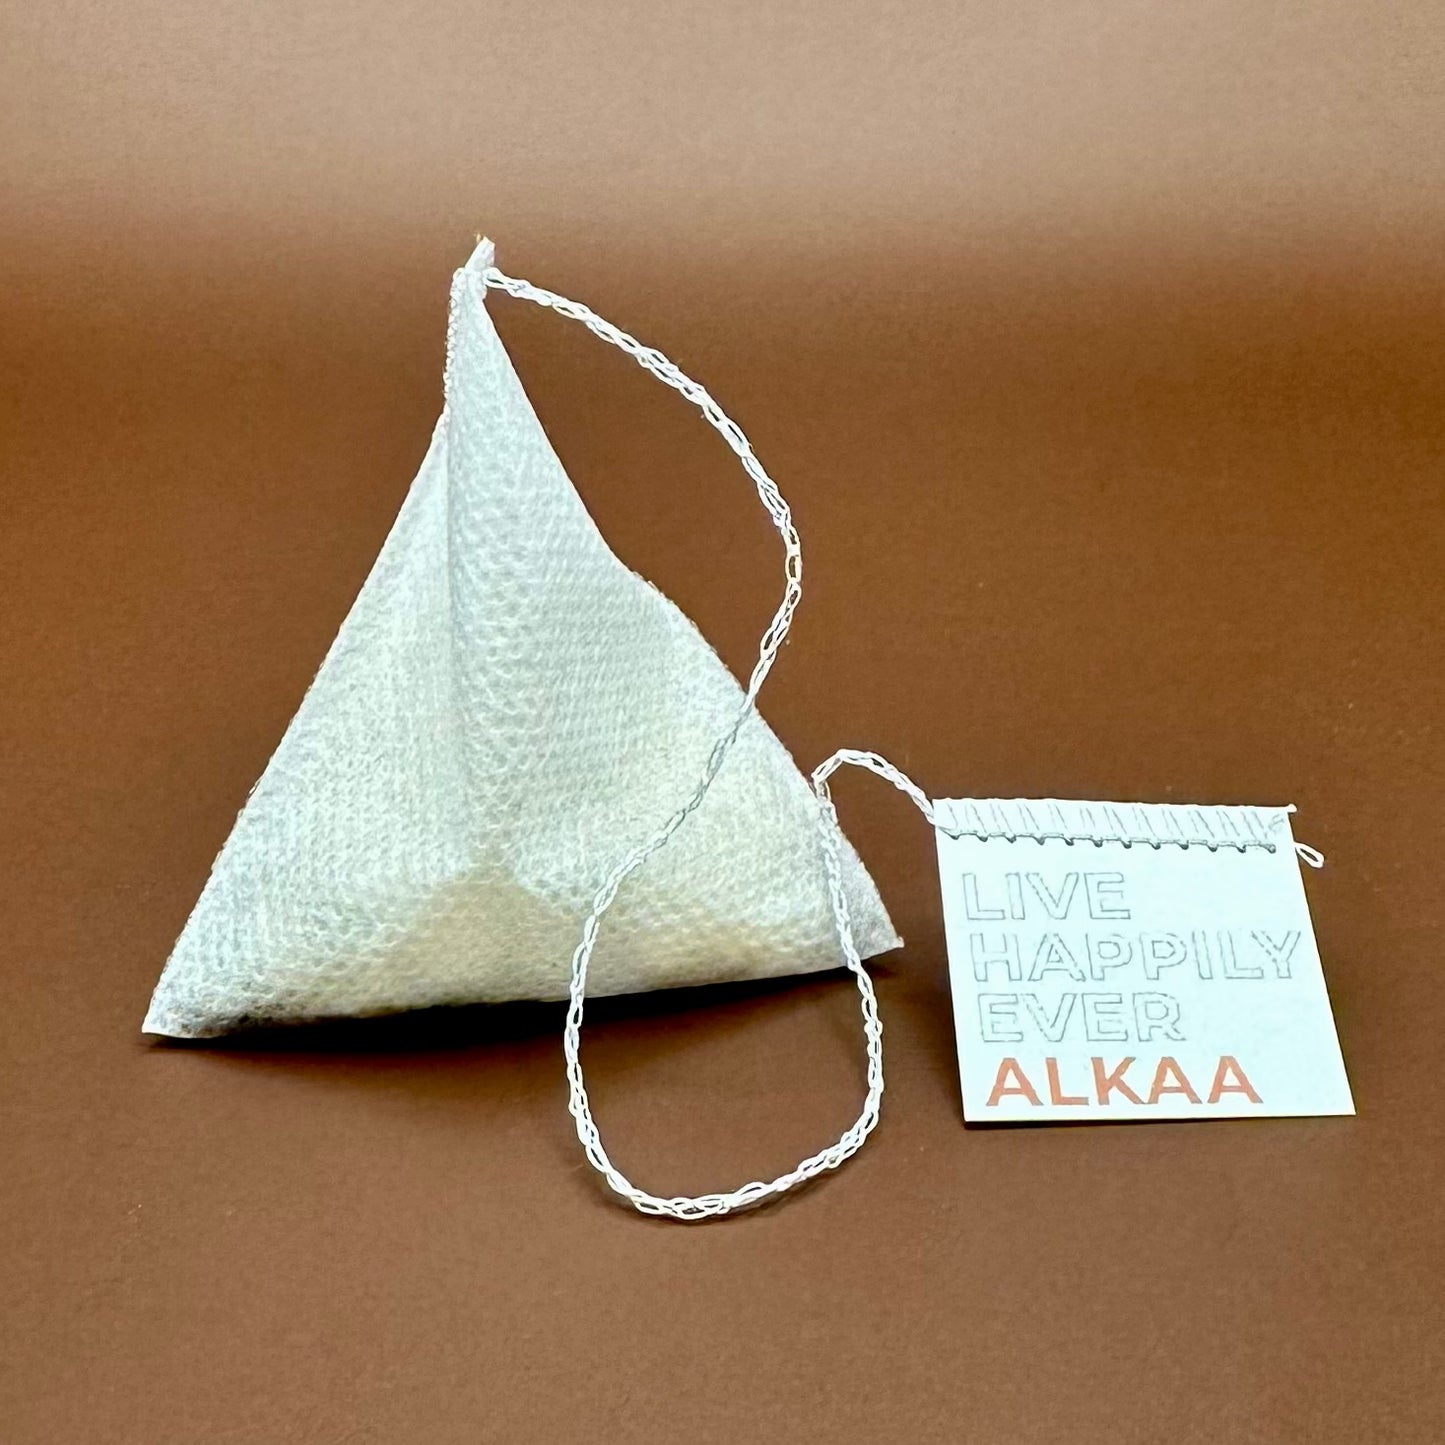 ALKAA Sachets - Tagged (Sachets with Strings)